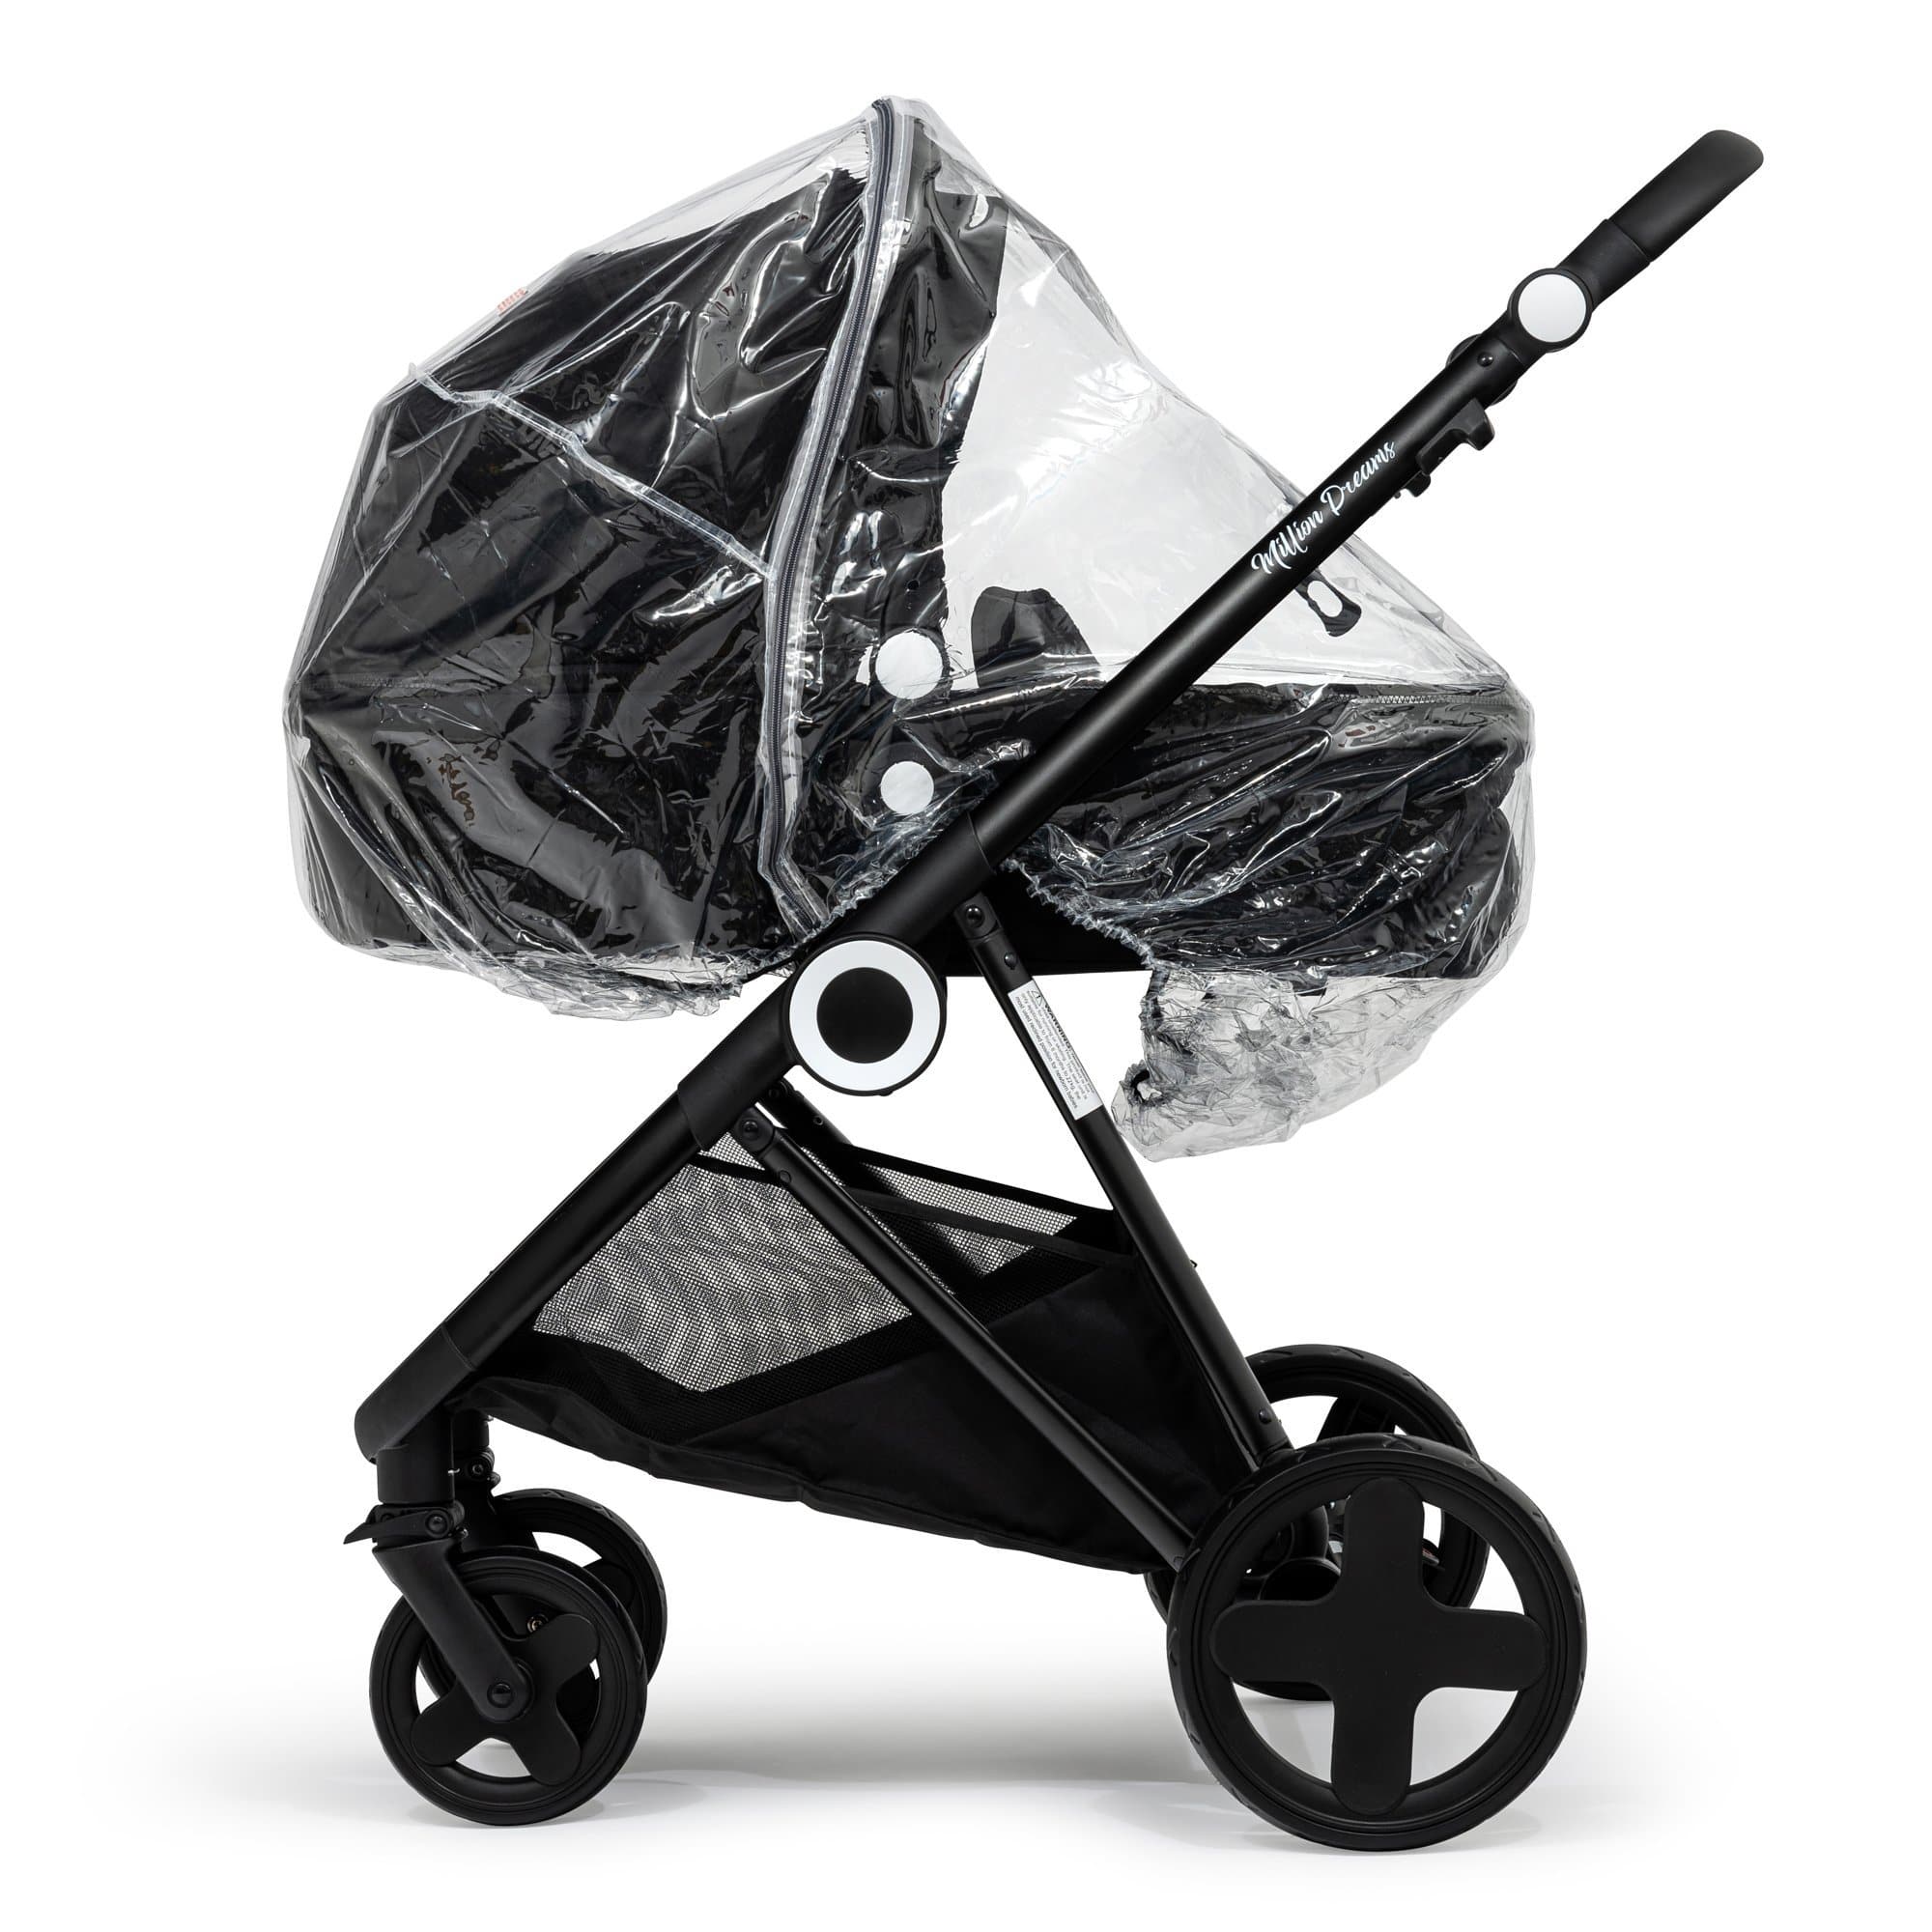 2 in 1 Rain Cover Compatible with Bugaboo - Fits All Models - For Your Little One